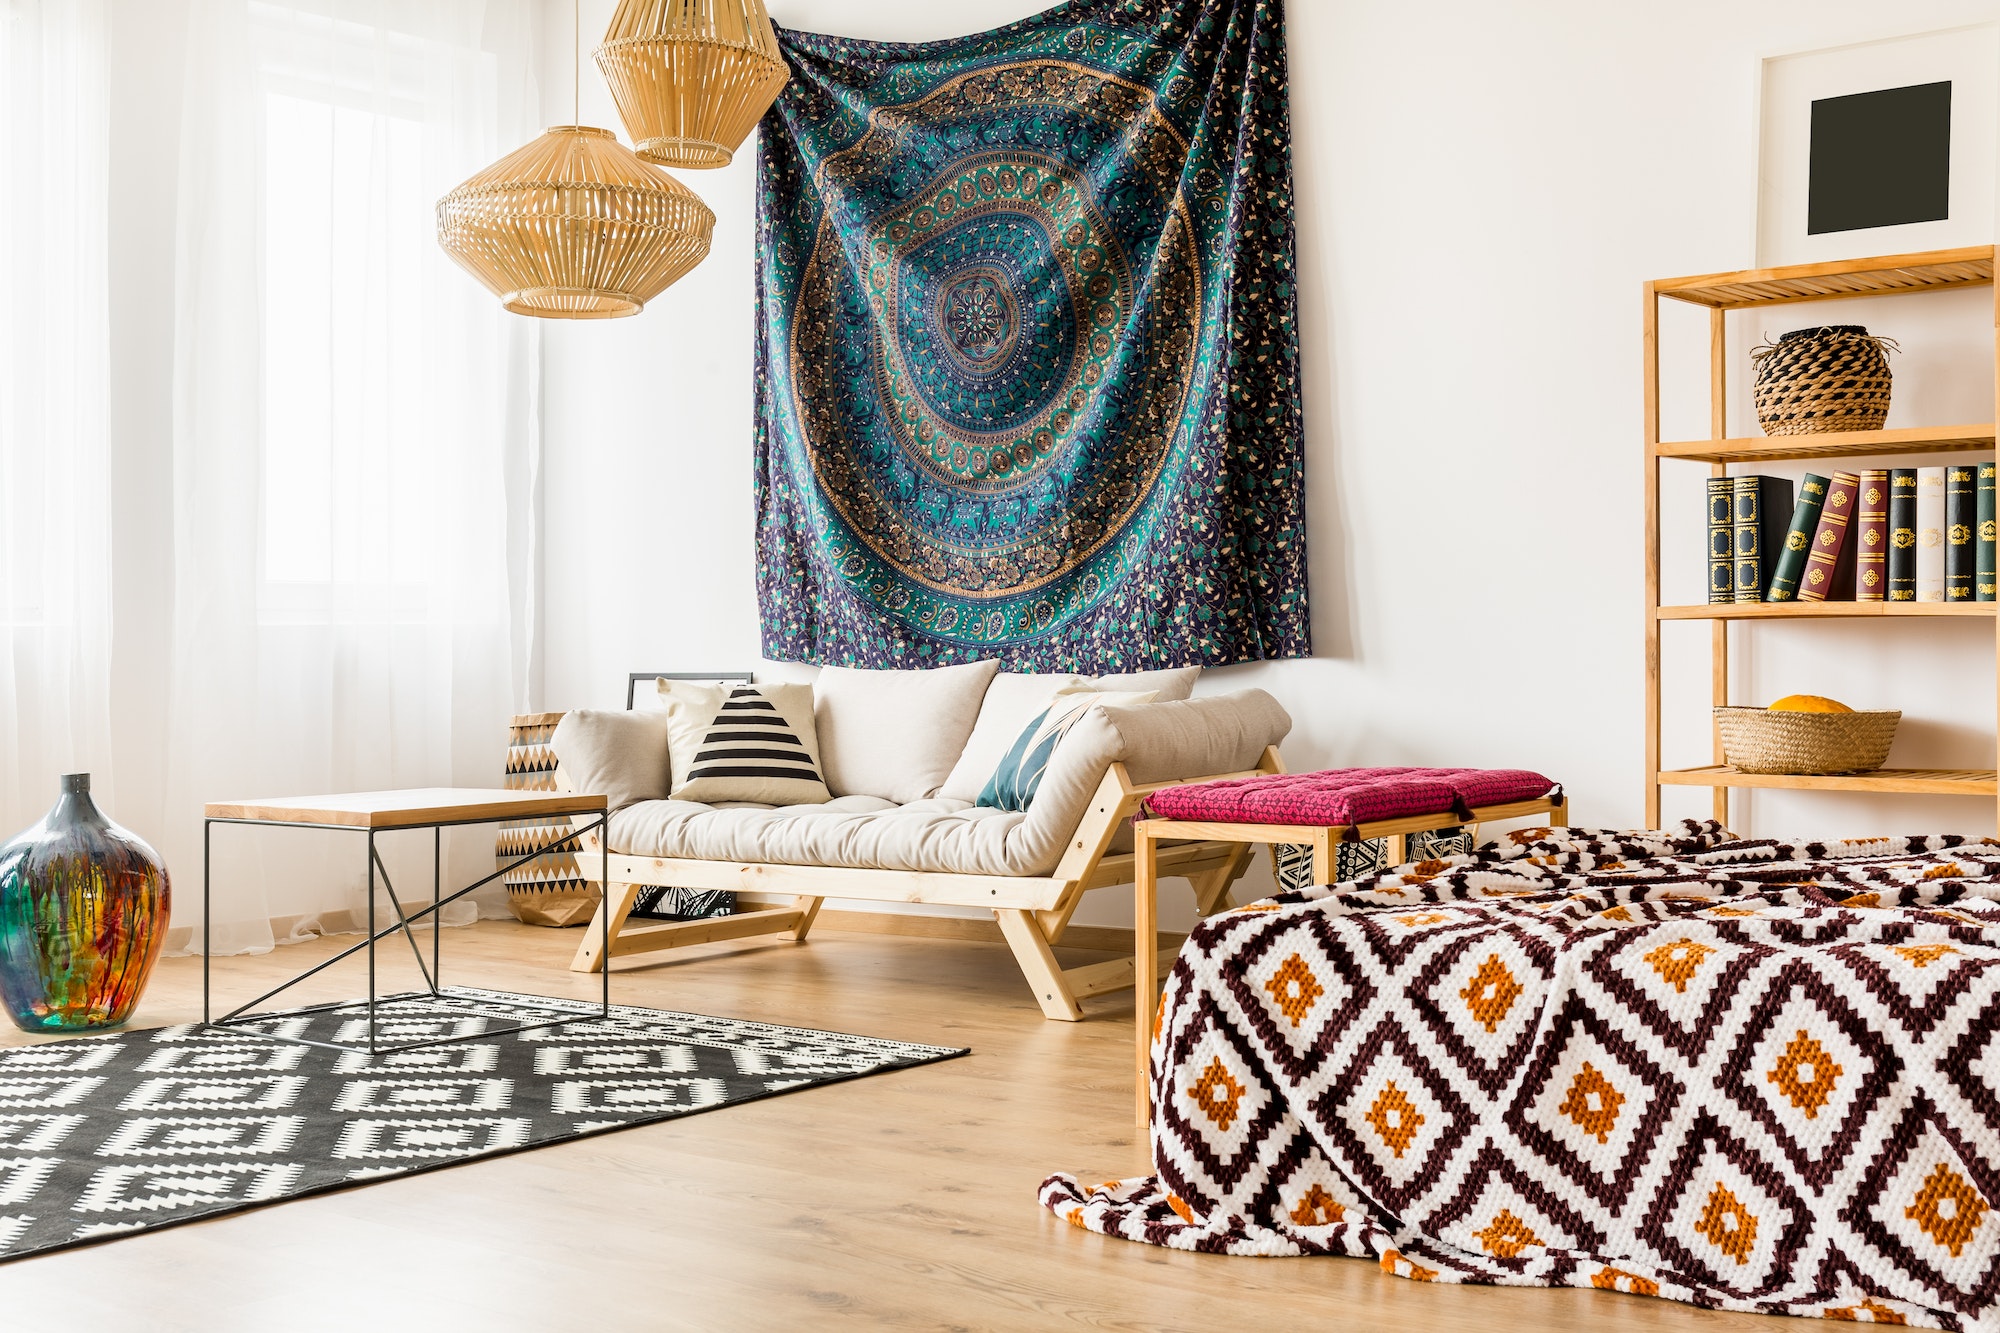 Studio apartment with oriental patterns